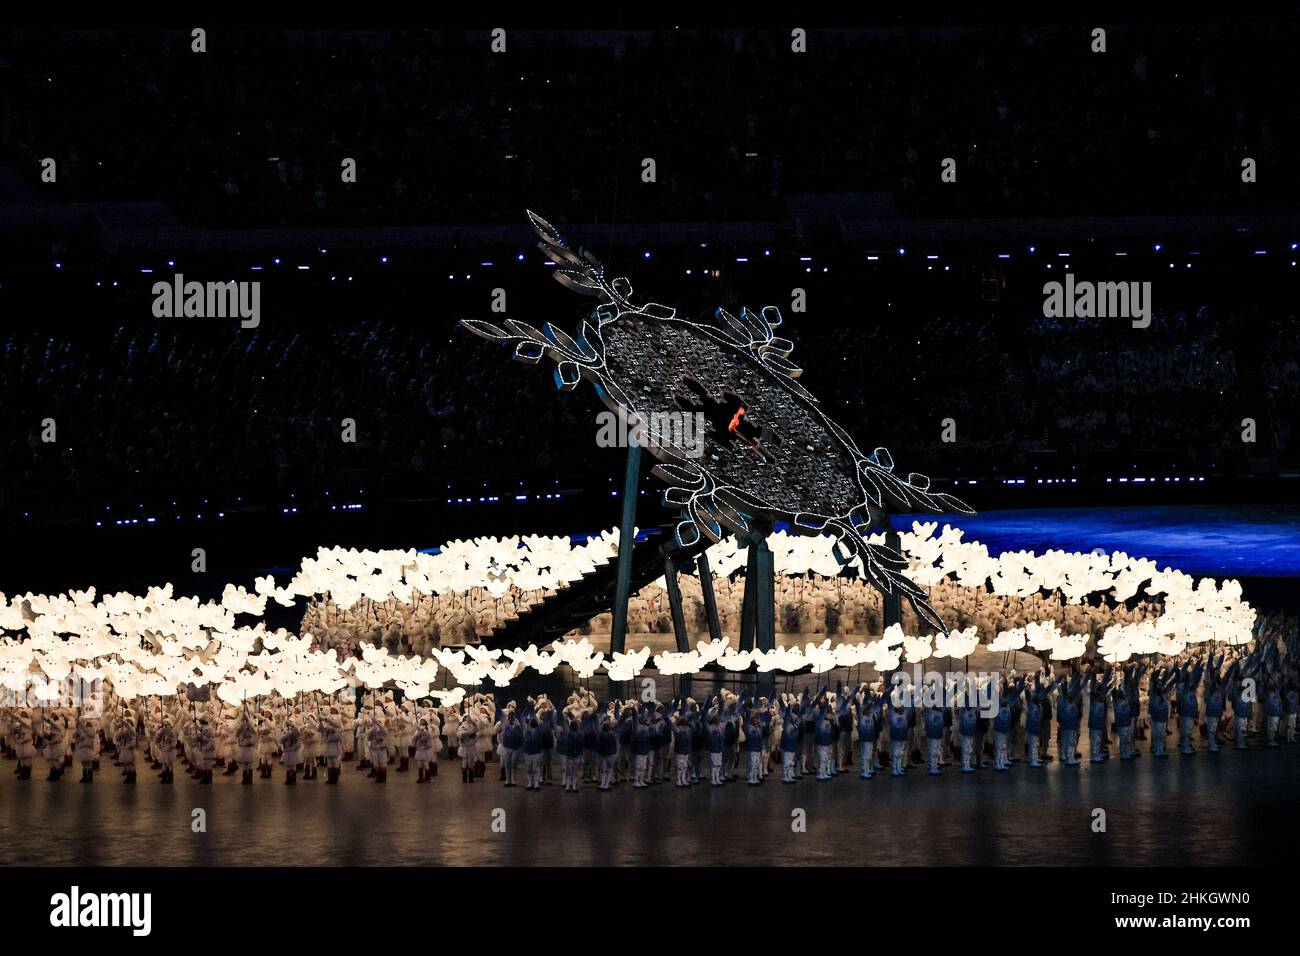 Illustration, ambiance during the Olympic Winter Games Beijing 2022, Opening Ceremony on February 4, 2022 at the National Stadium in Beijing, China - Photo: Osports/DPPI/LiveMedia Stock Photo